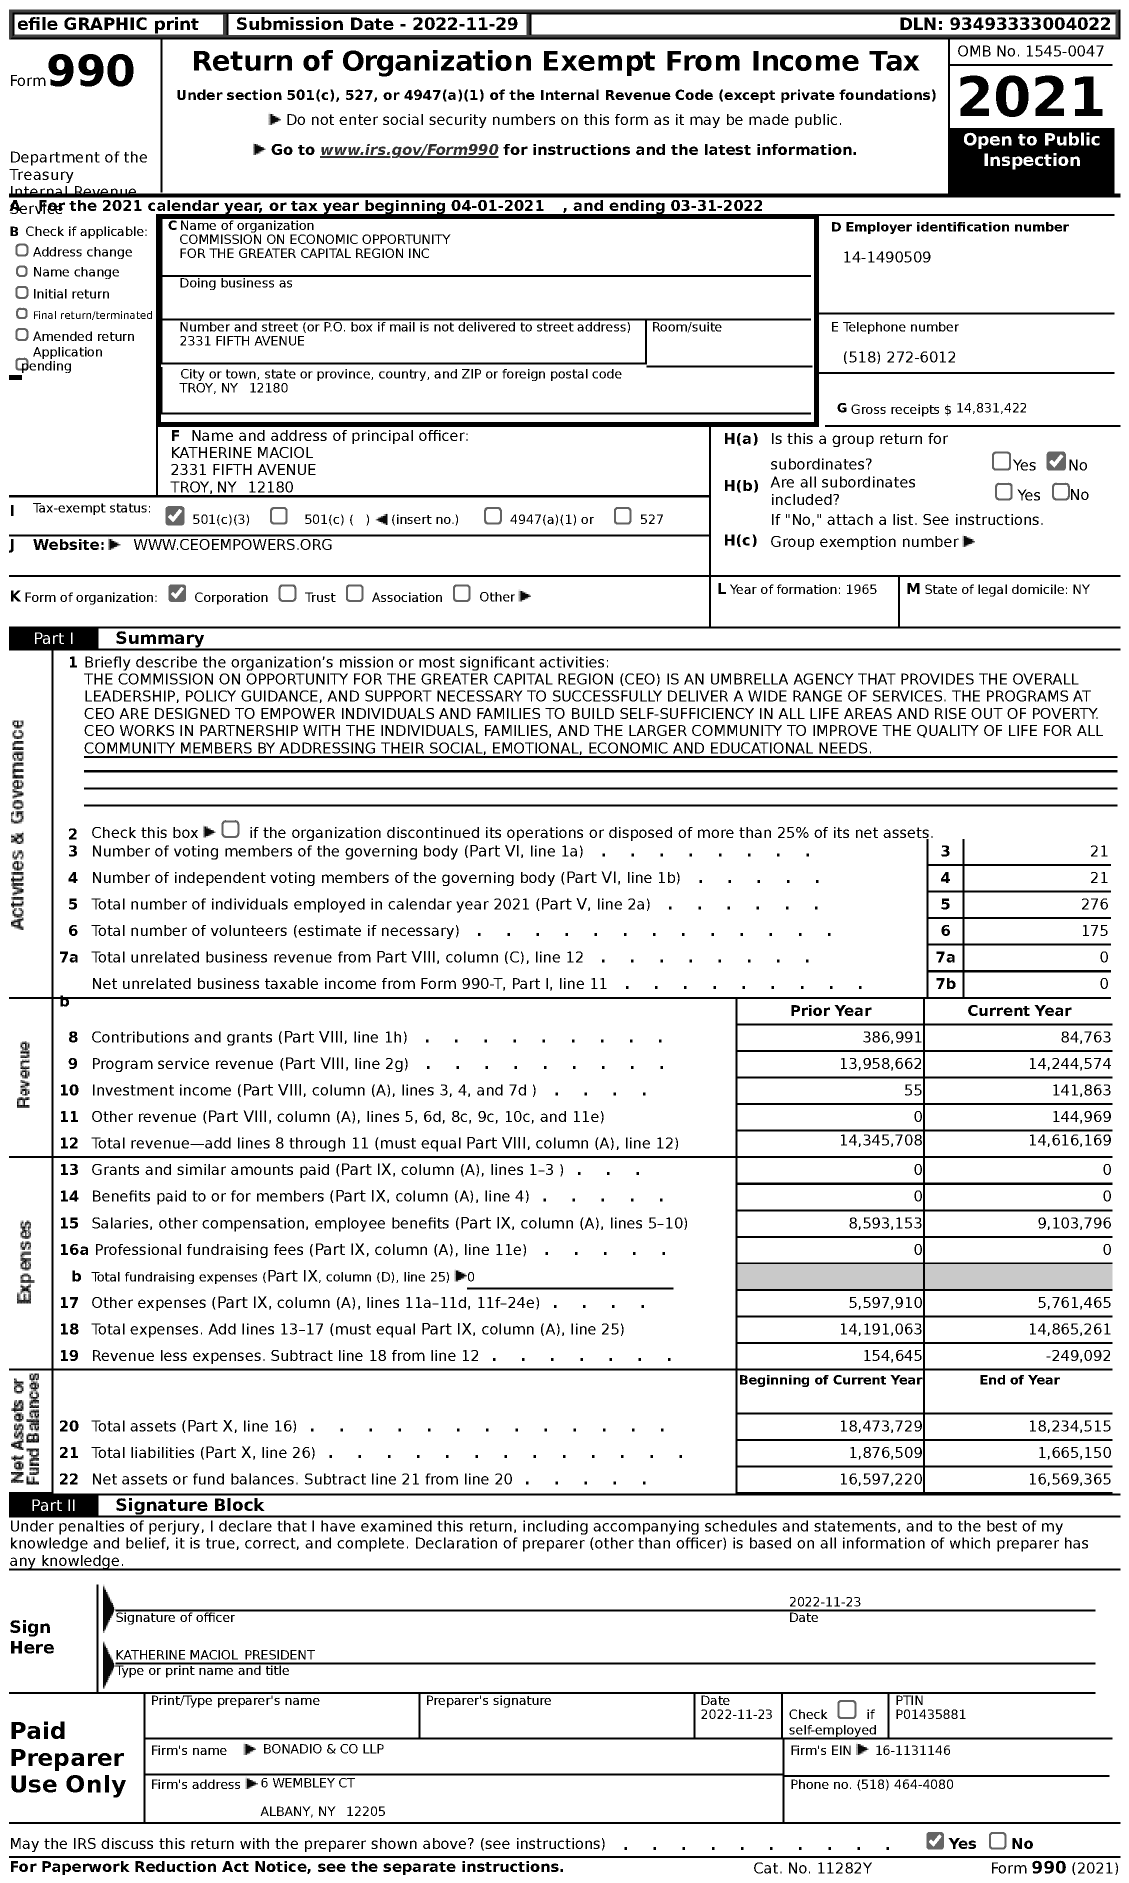 Image of first page of 2021 Form 990 for Commission on Economic Opportunity for the Greater Capital Region (CEO)